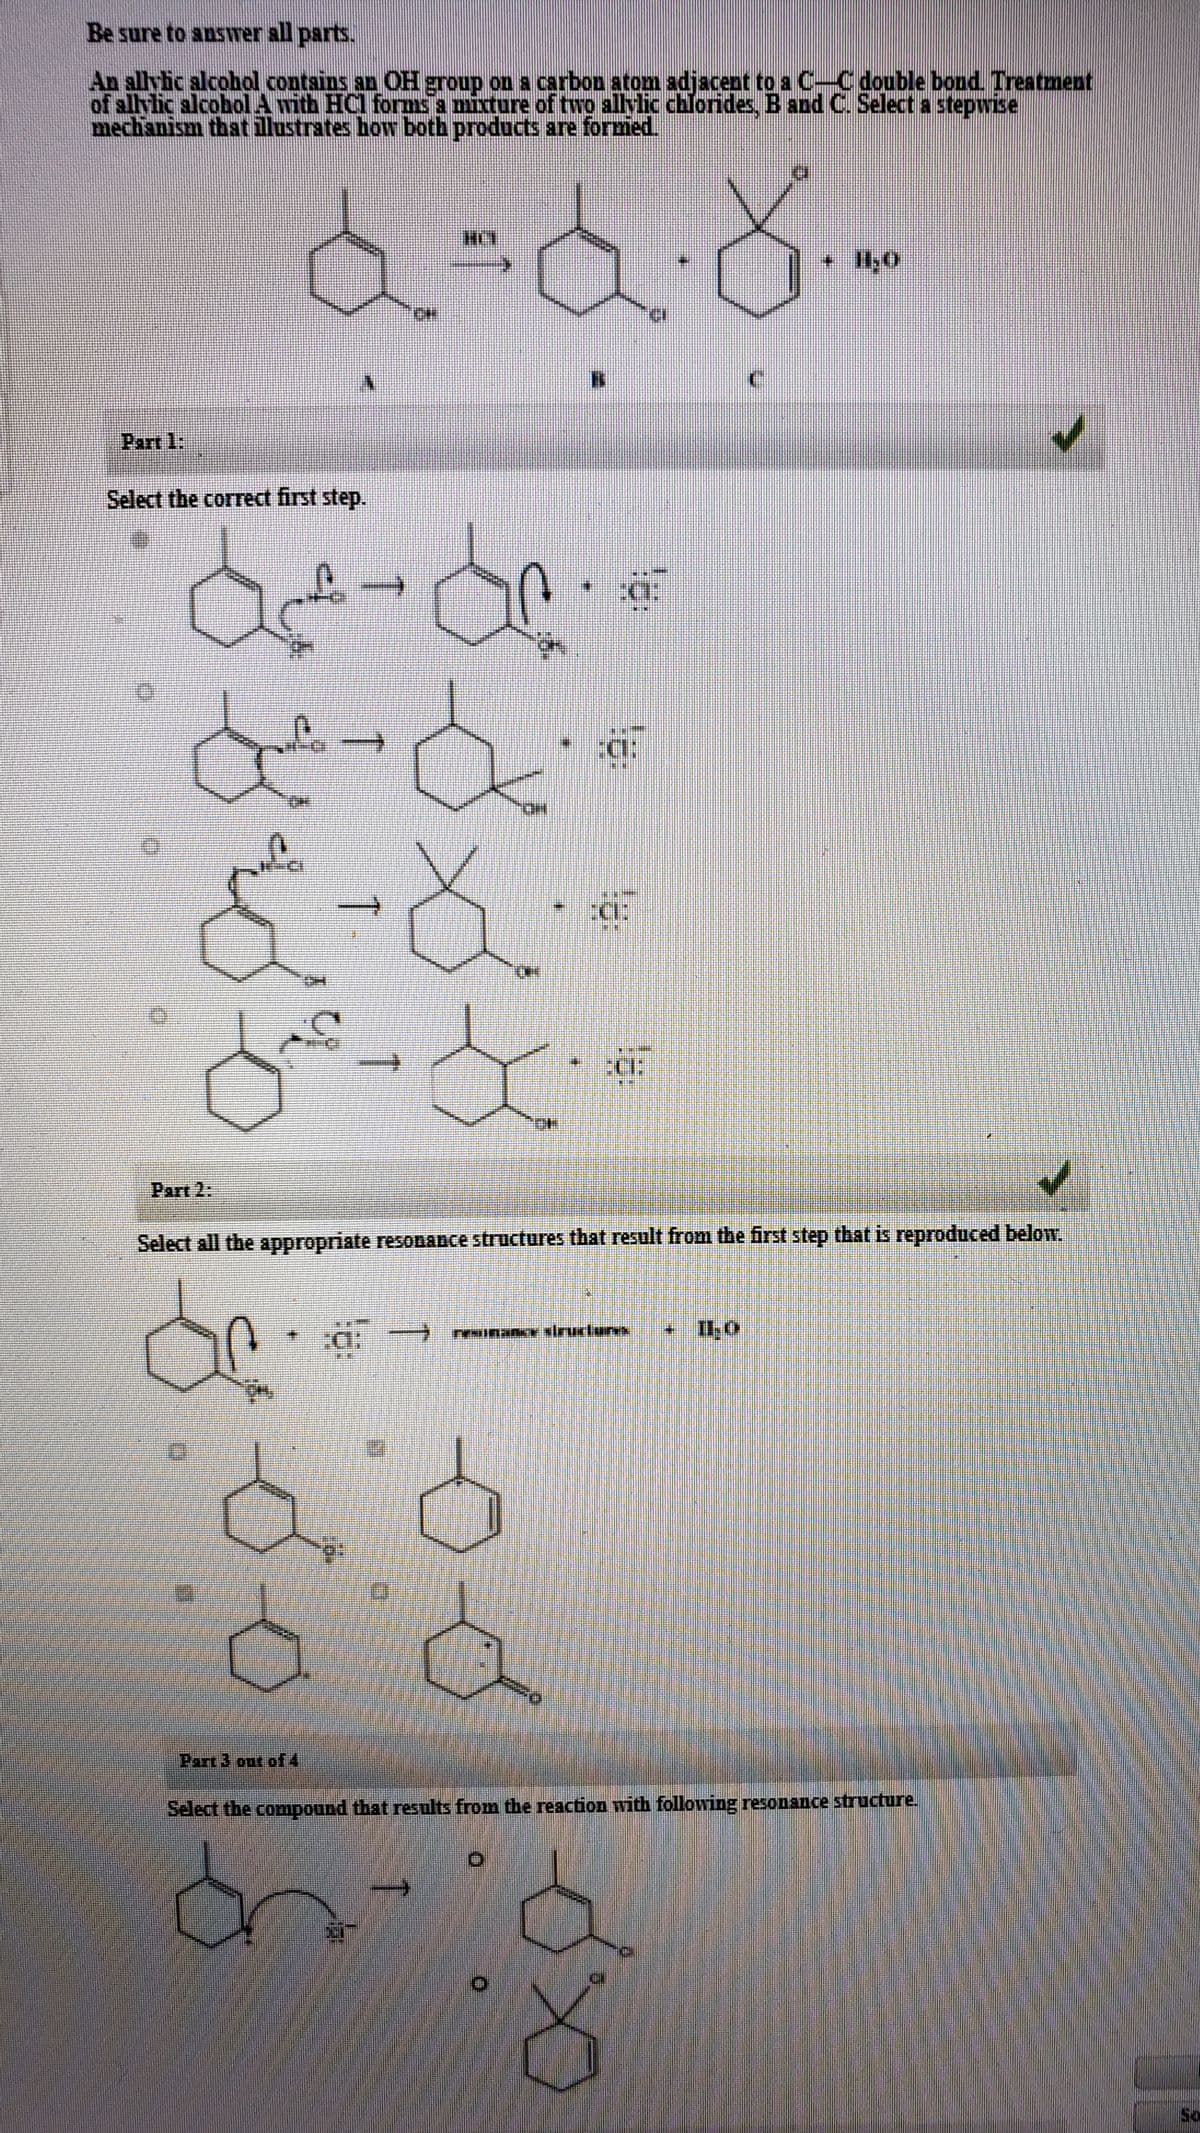 Be sure to answer all parts.
An allyic alcobhol contsins an OH group on a carbon atom adjacent to a C-C double bond. Treatment
of allylic alcobol A with HCl forms a mixture of two allylic chlorides, B and C. Select a stepwise
mechanism that illustrates how both products are formed.
Part 1:
Select the correct first step.
Part 2:
Select all the appropriate resODAnce structures that result from the first step that is reproduced below.
• I1,0
主 E
Part 3 out of4
Select the compound that results from the reaction with following resonance structure.
So
